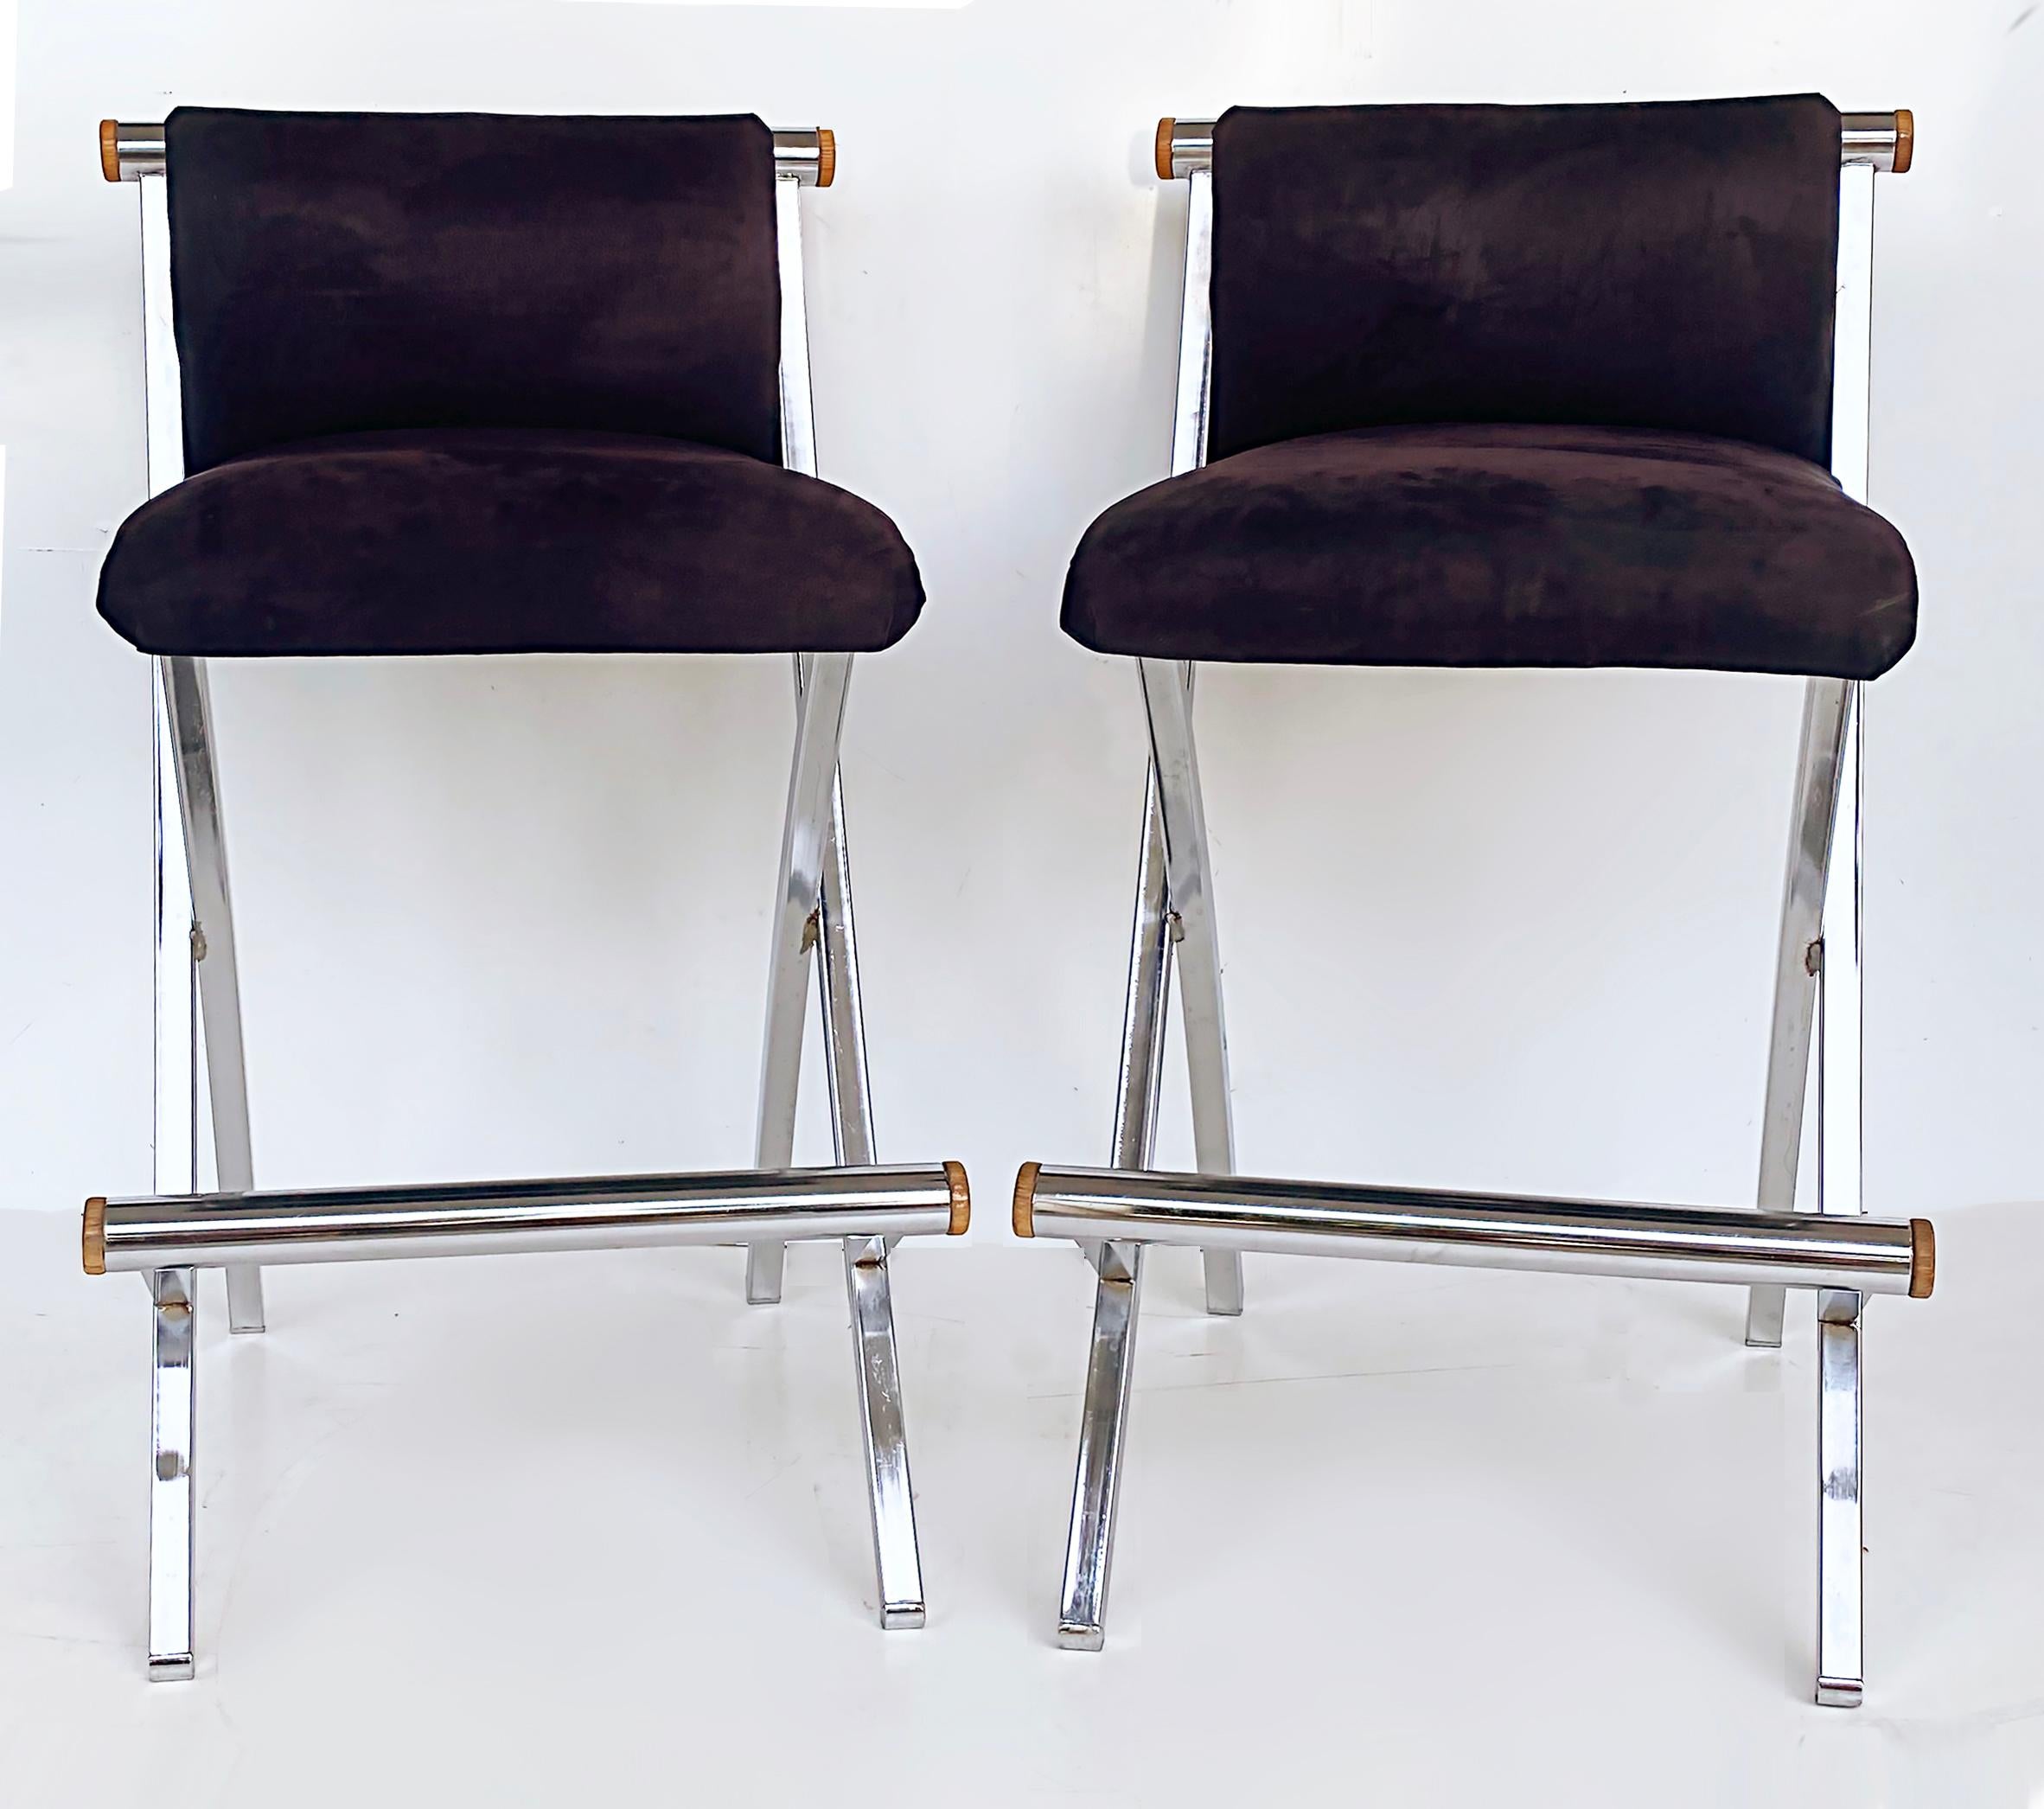 Midcentury Style Daystrom Set of 4 Chrome Bar Stools, Wood, Ultrasuede

Offered for sale is a set of four Mid-Century Modern-style vintage barstools circa 1980 made by Daystrom Furniture. This set of stools has chrome X-framed bases with